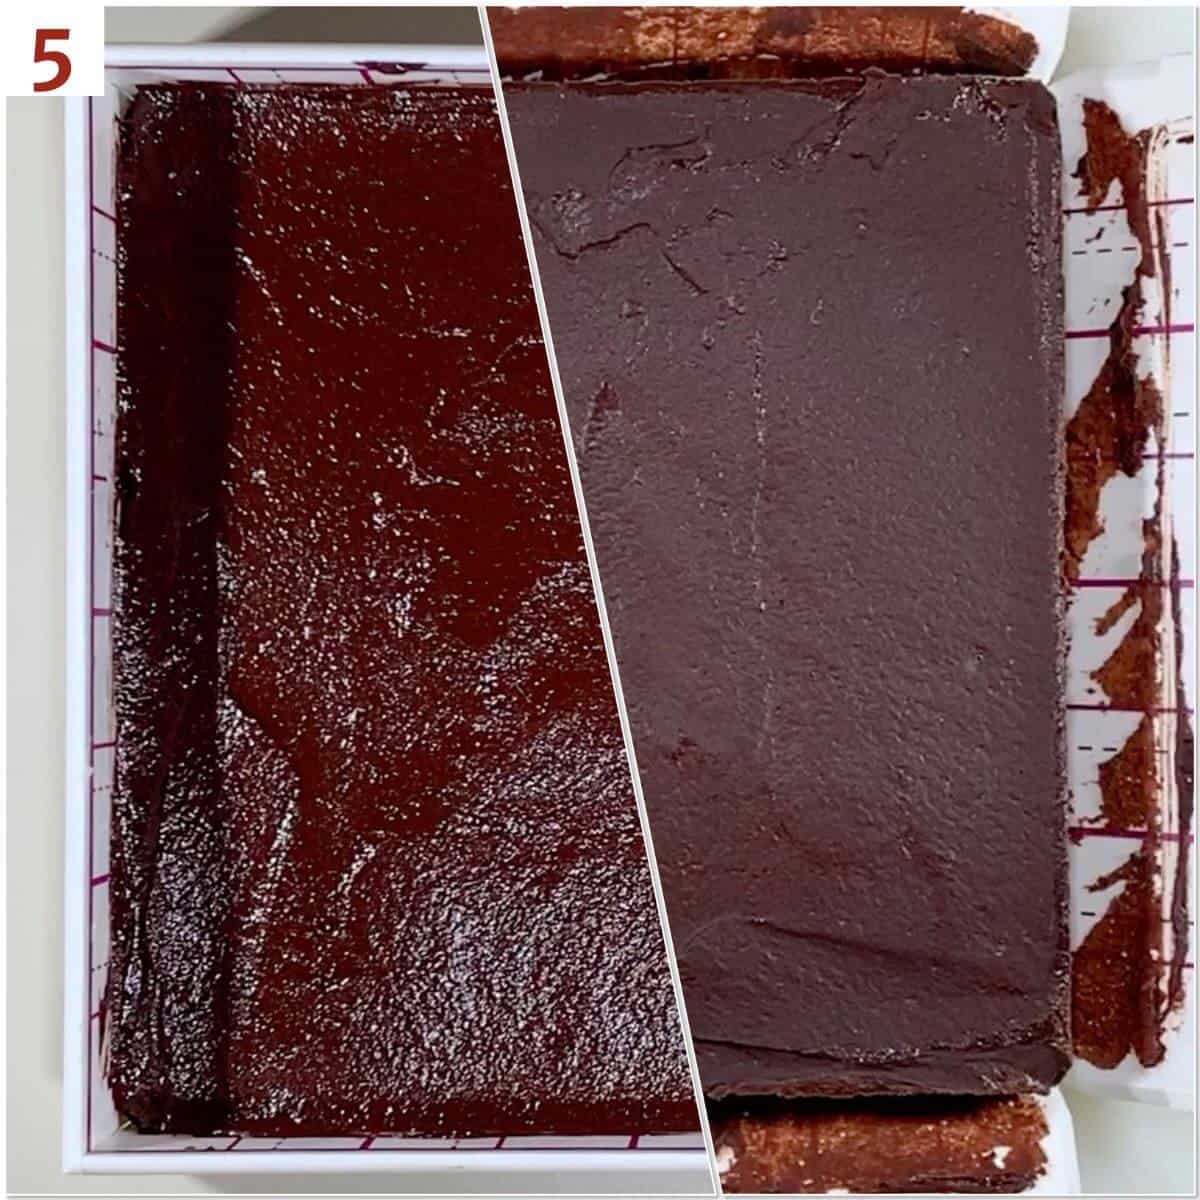 Collage of Kahlua Chocolate Fudge before and after hardening.